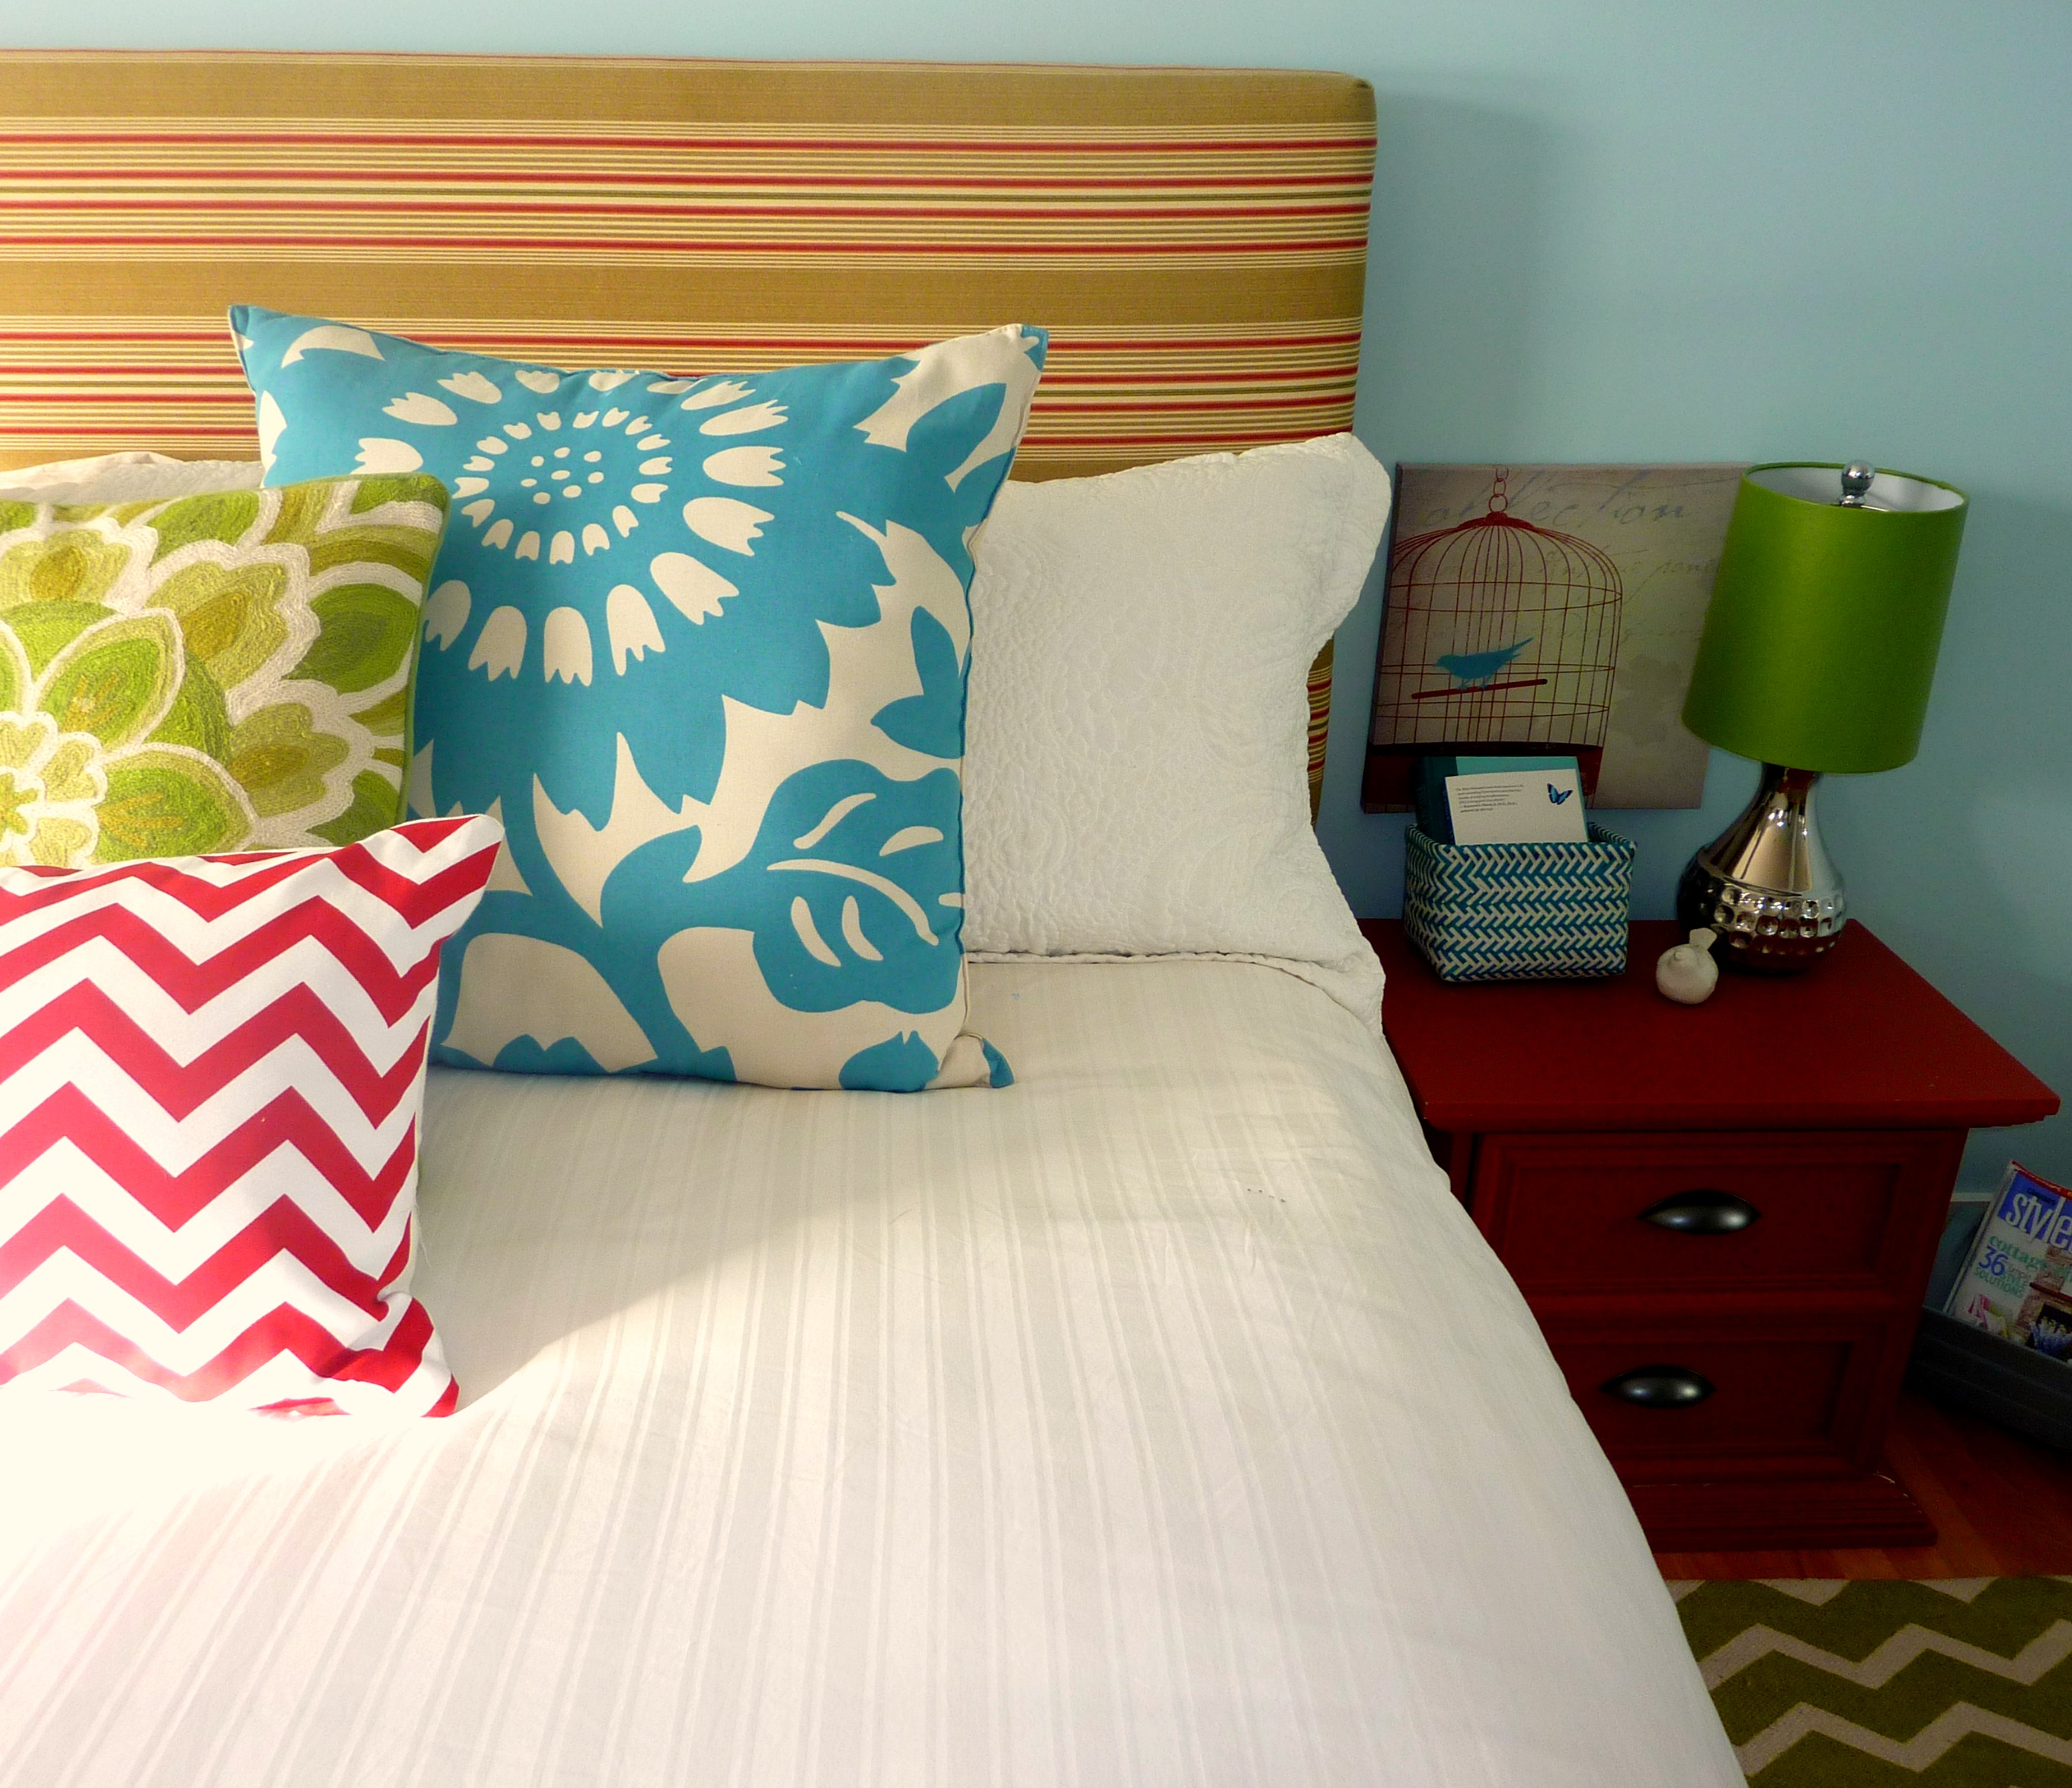 Almost Free: Create a Bedroom You Love on a Budget